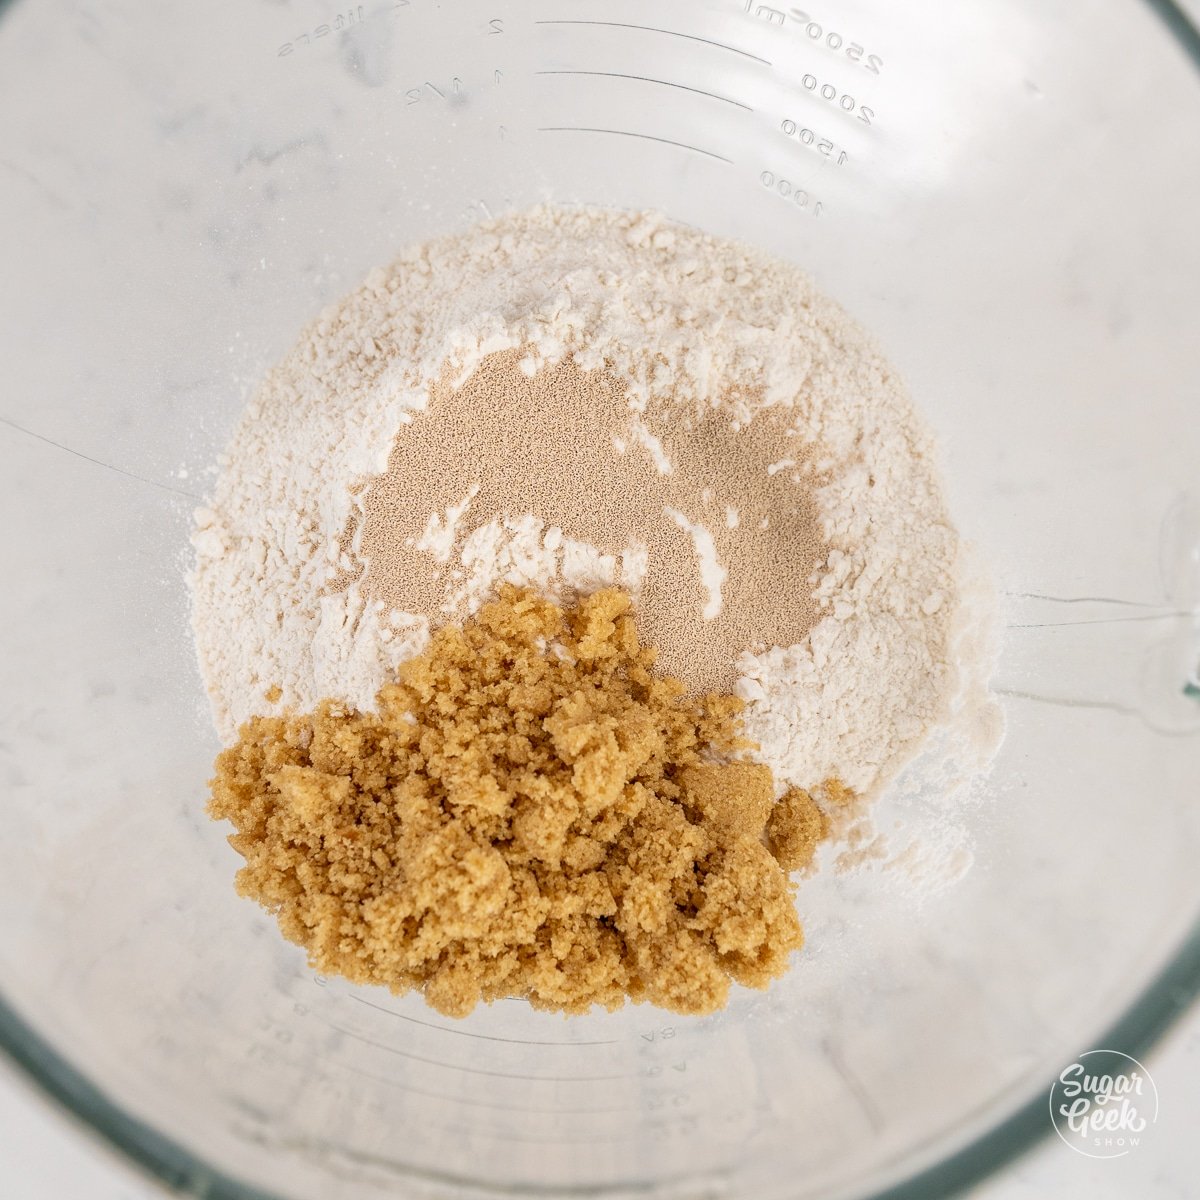 yeast, flour, and sugar in a glass bowl